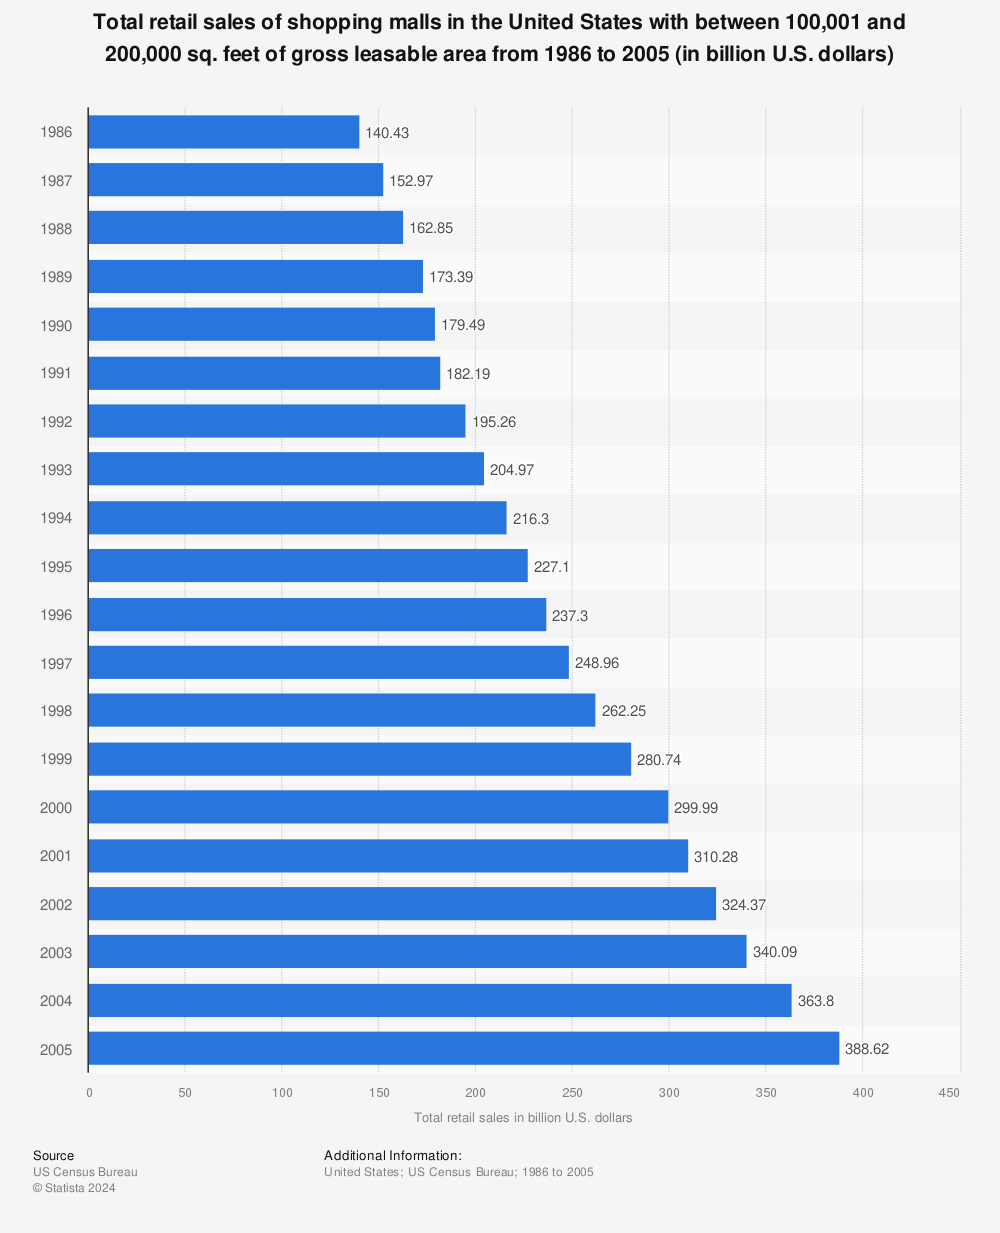 Statistic: Total retail sales of shopping malls in the United States with between 100,001 and 200,000 sq. feet of gross leasable area from 1986 to 2005 (in billion U.S. dollars) | Statista